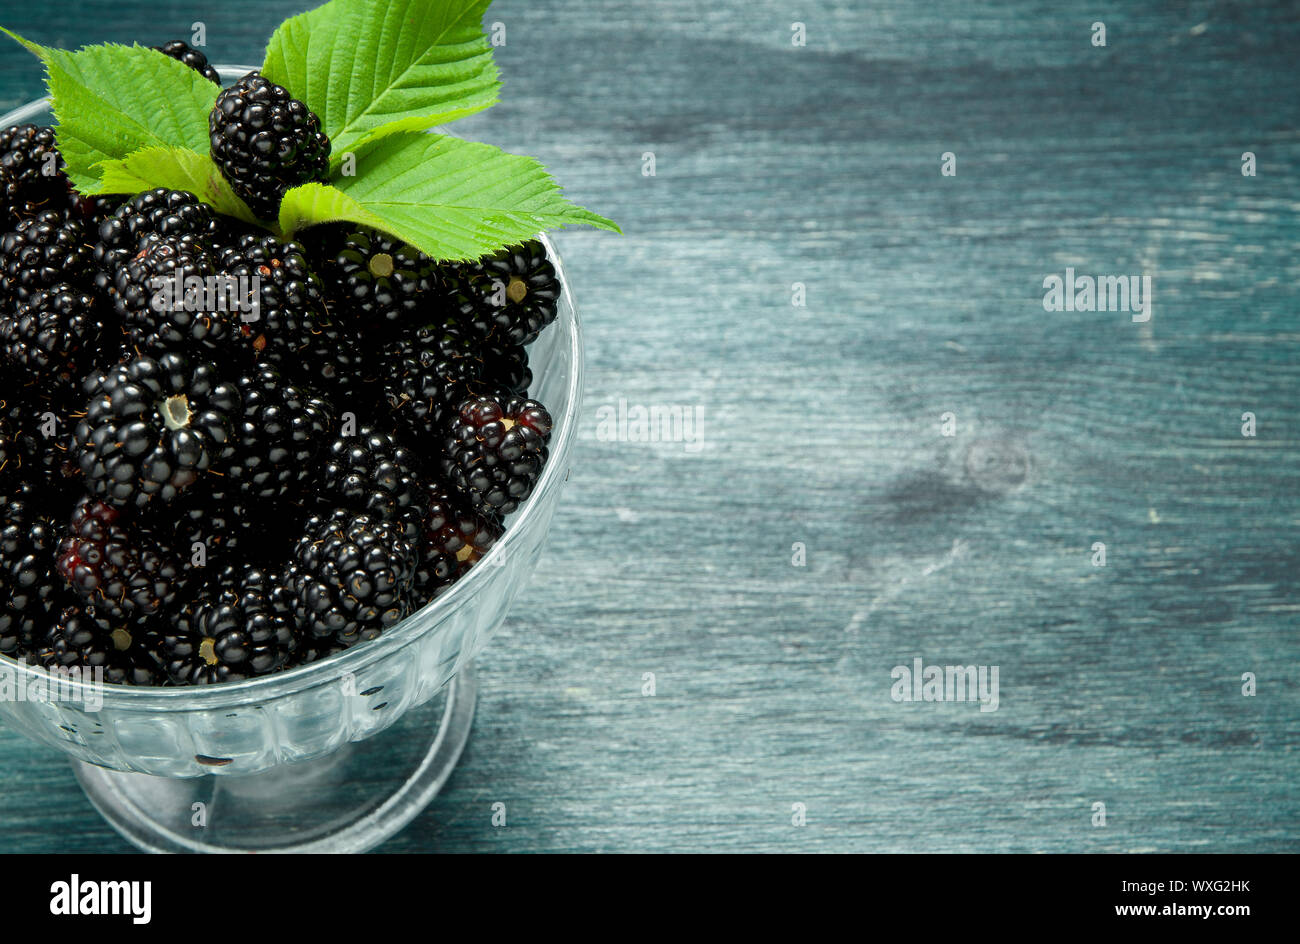 Fresh blackberry. Juicy blackberry in a bowl on a wooden table. View from above. Copy space. Harvest concept Stock Photo